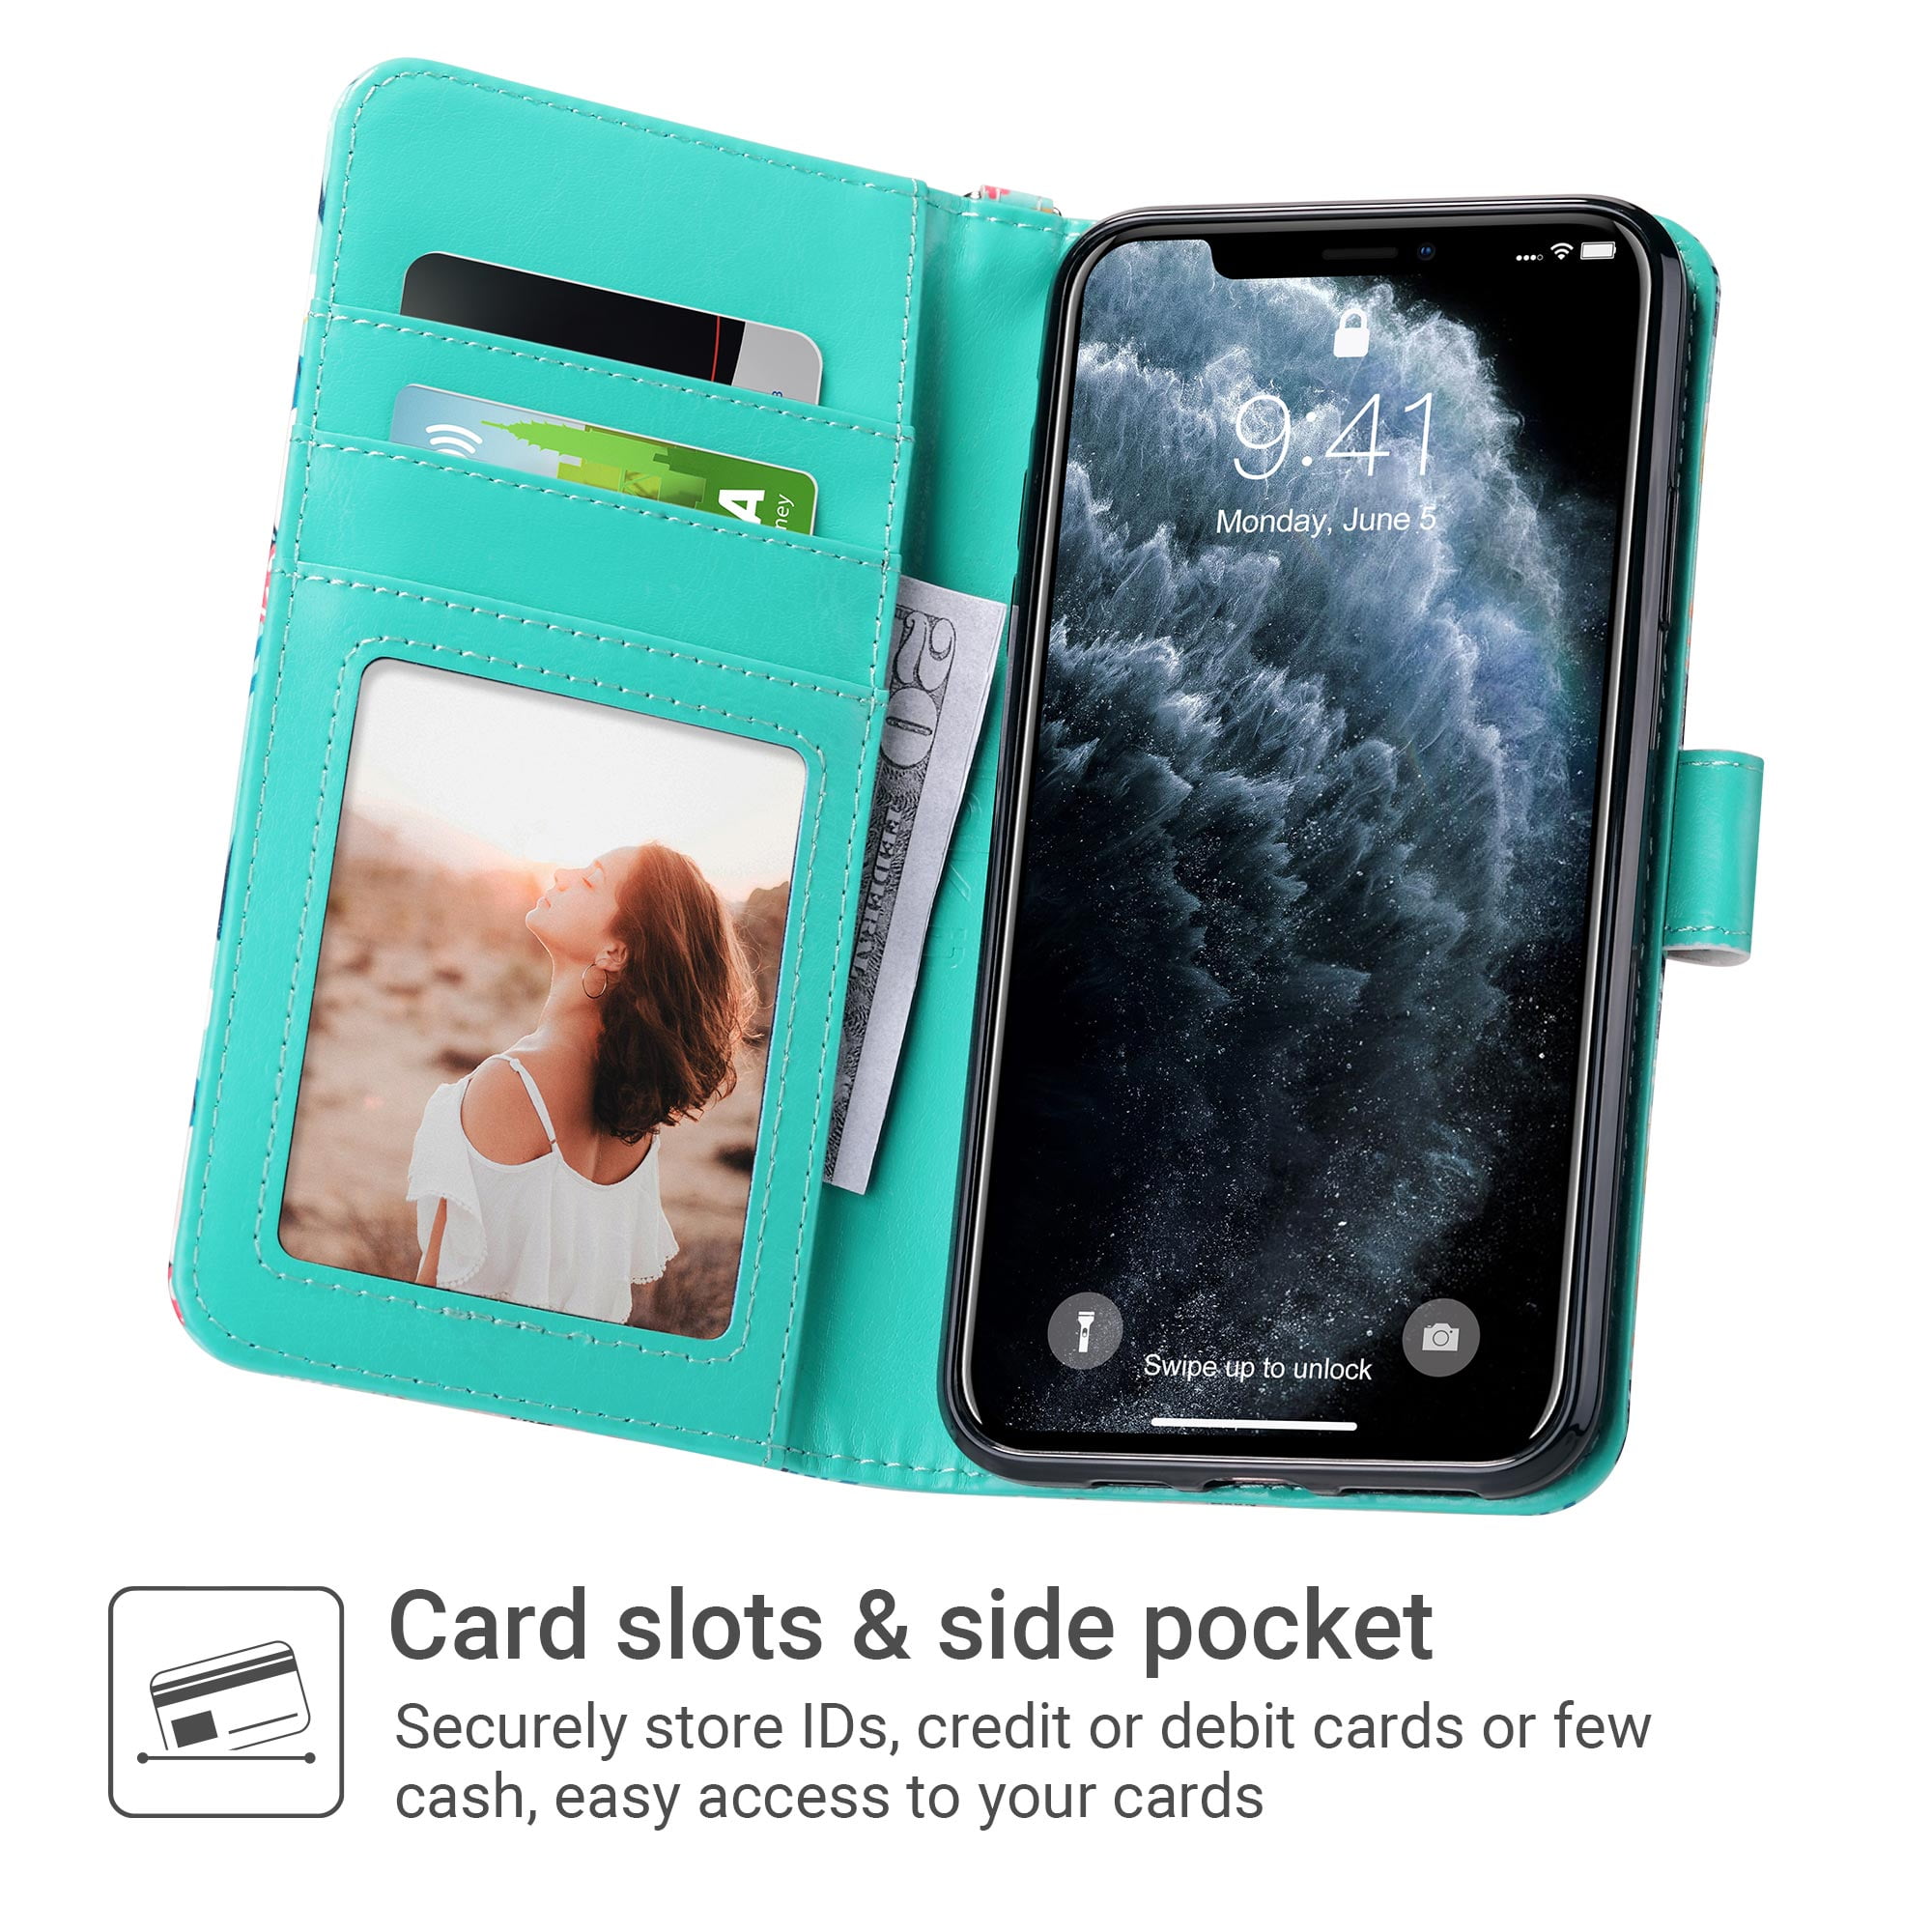 yosicl iPhone 11 Pro Max Case Wallet, iPhone 11 Pro Max Wallet Case with Card Holder, Leather Kickstand Card Slot Case with Screen Protector, Wrist Hand